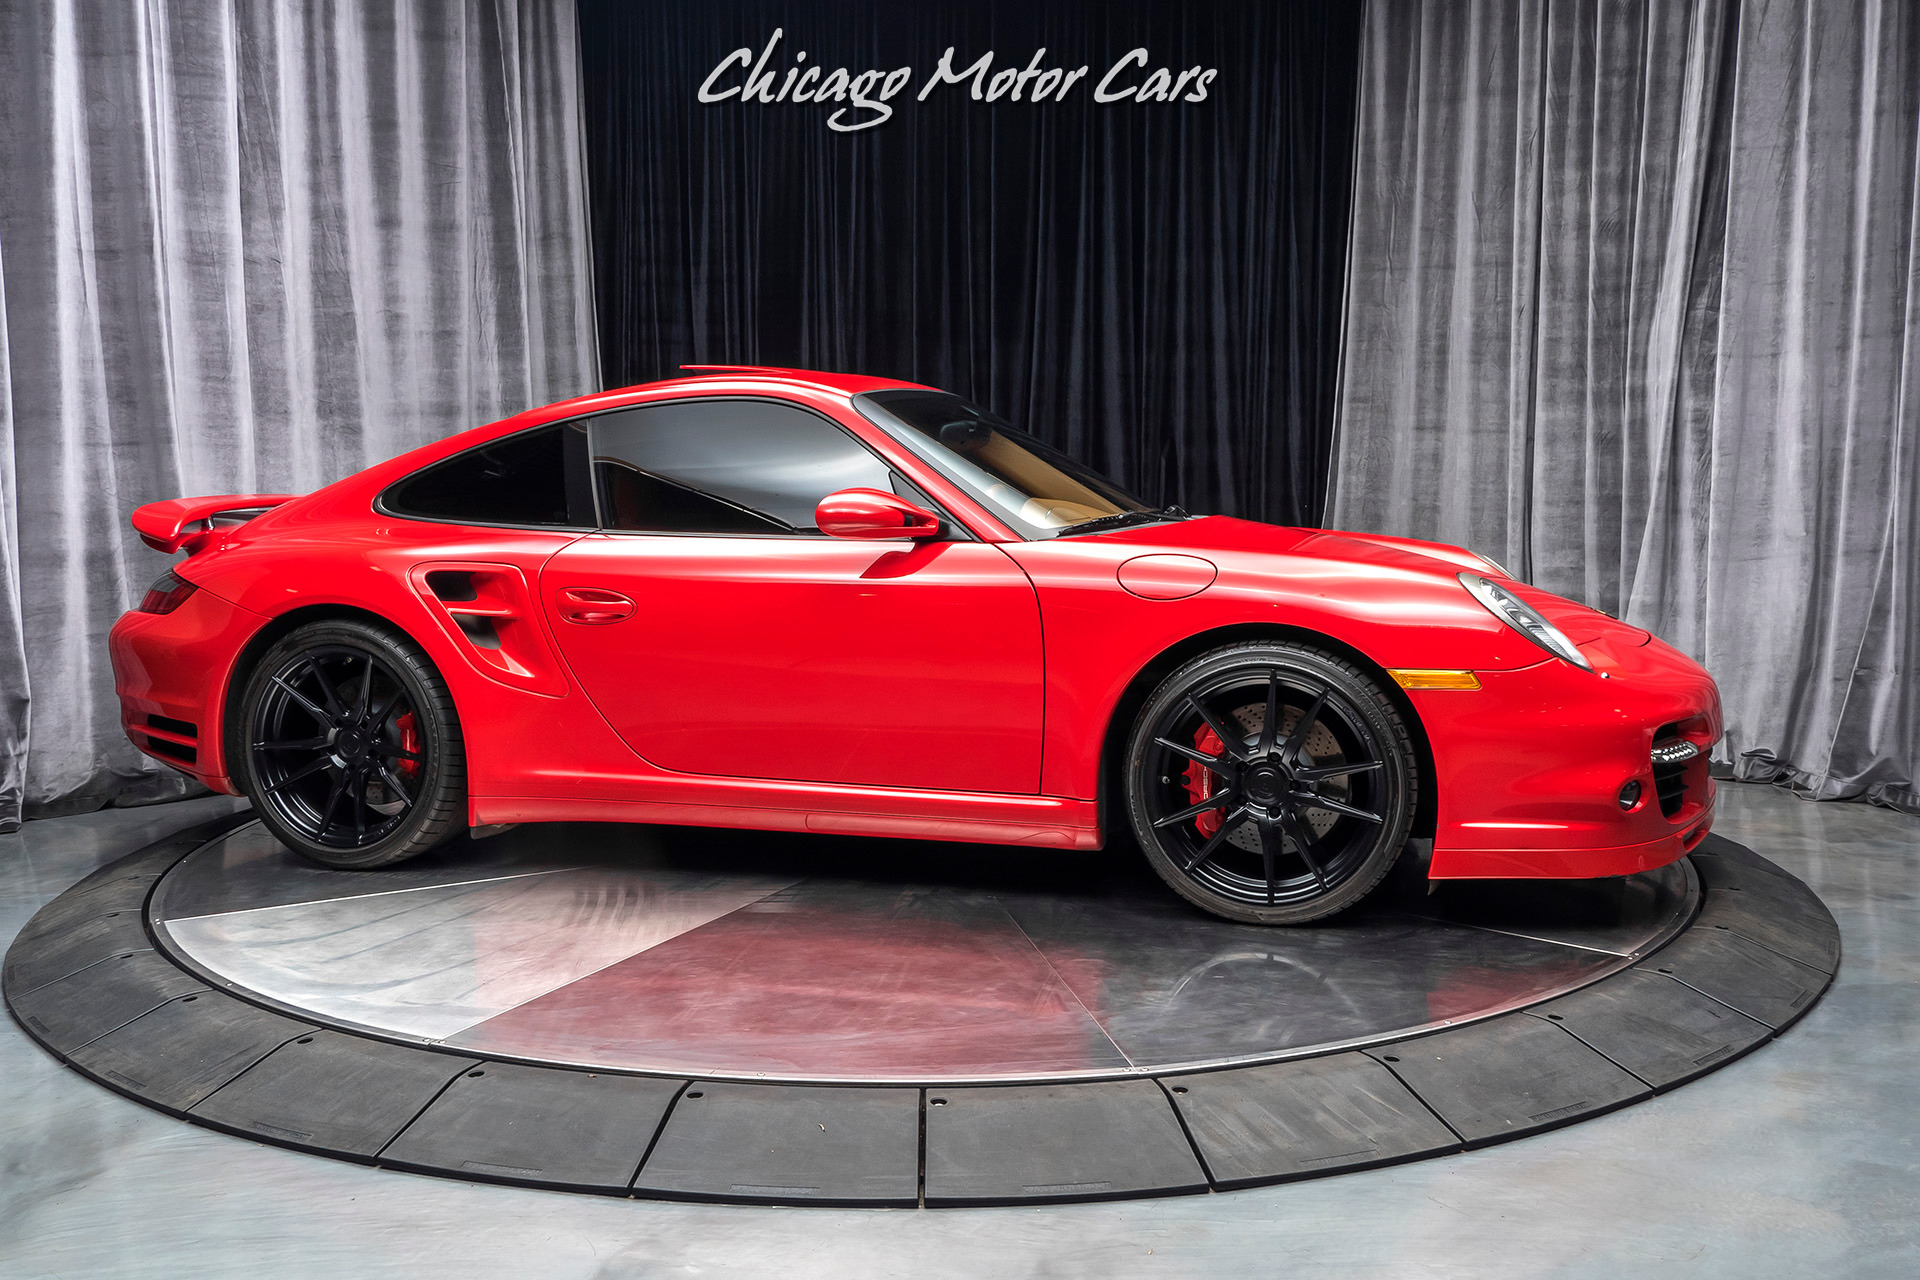 Used-2008-Porsche-911-Turbo-Coupe-MSRP-141K-SPORT-CHRONO-PACKAGE-Tiptronic